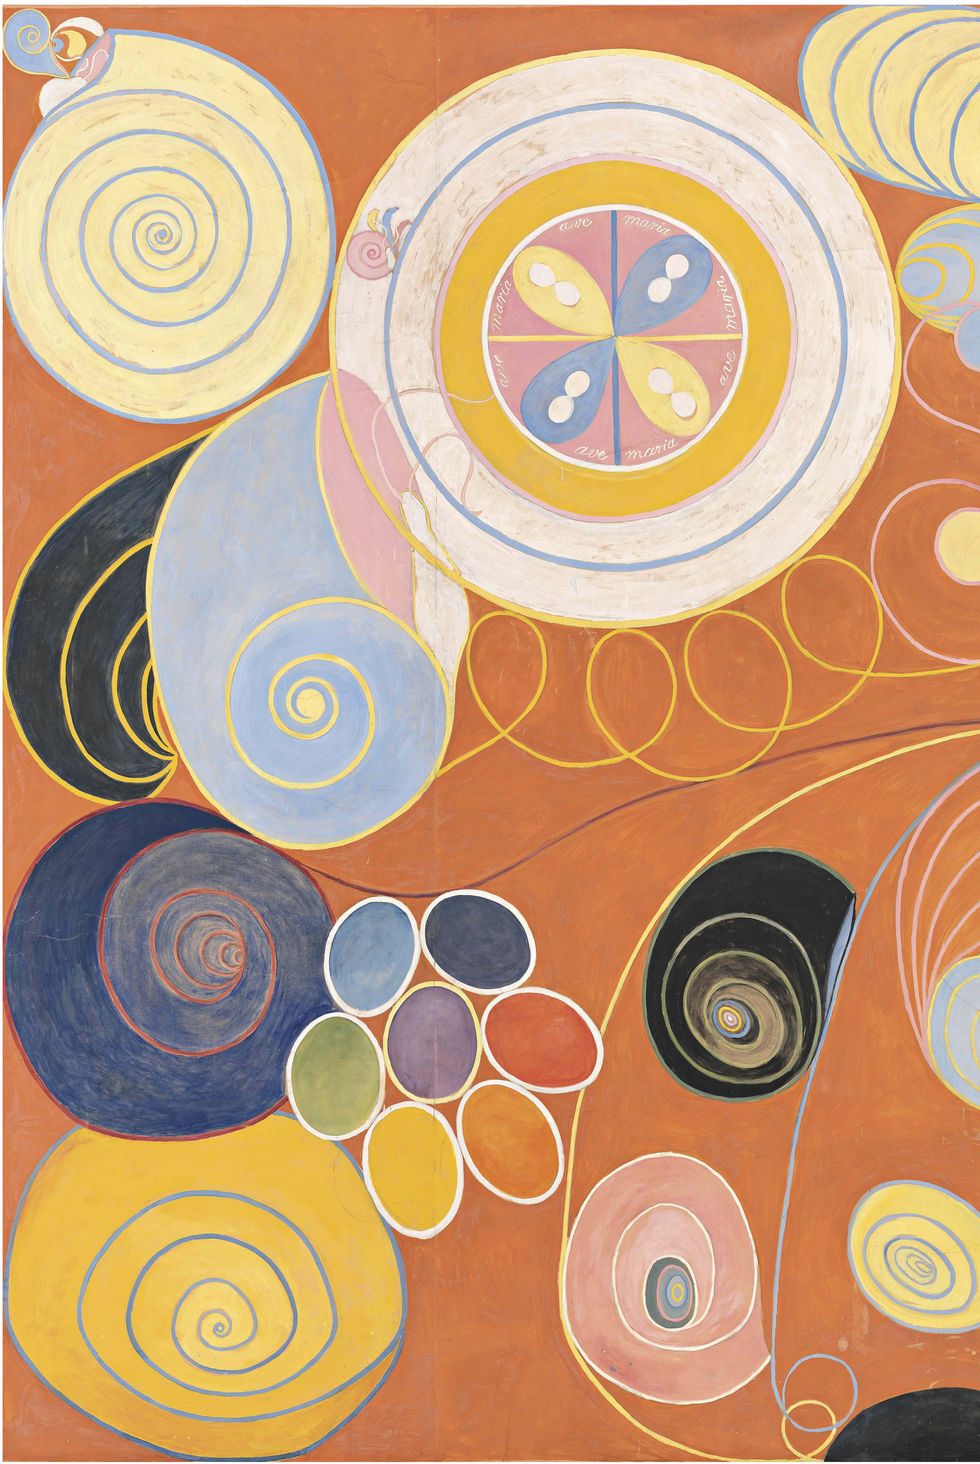 the ten largest, group iv, no 3, youth ﻿by hilma af klint, 1907